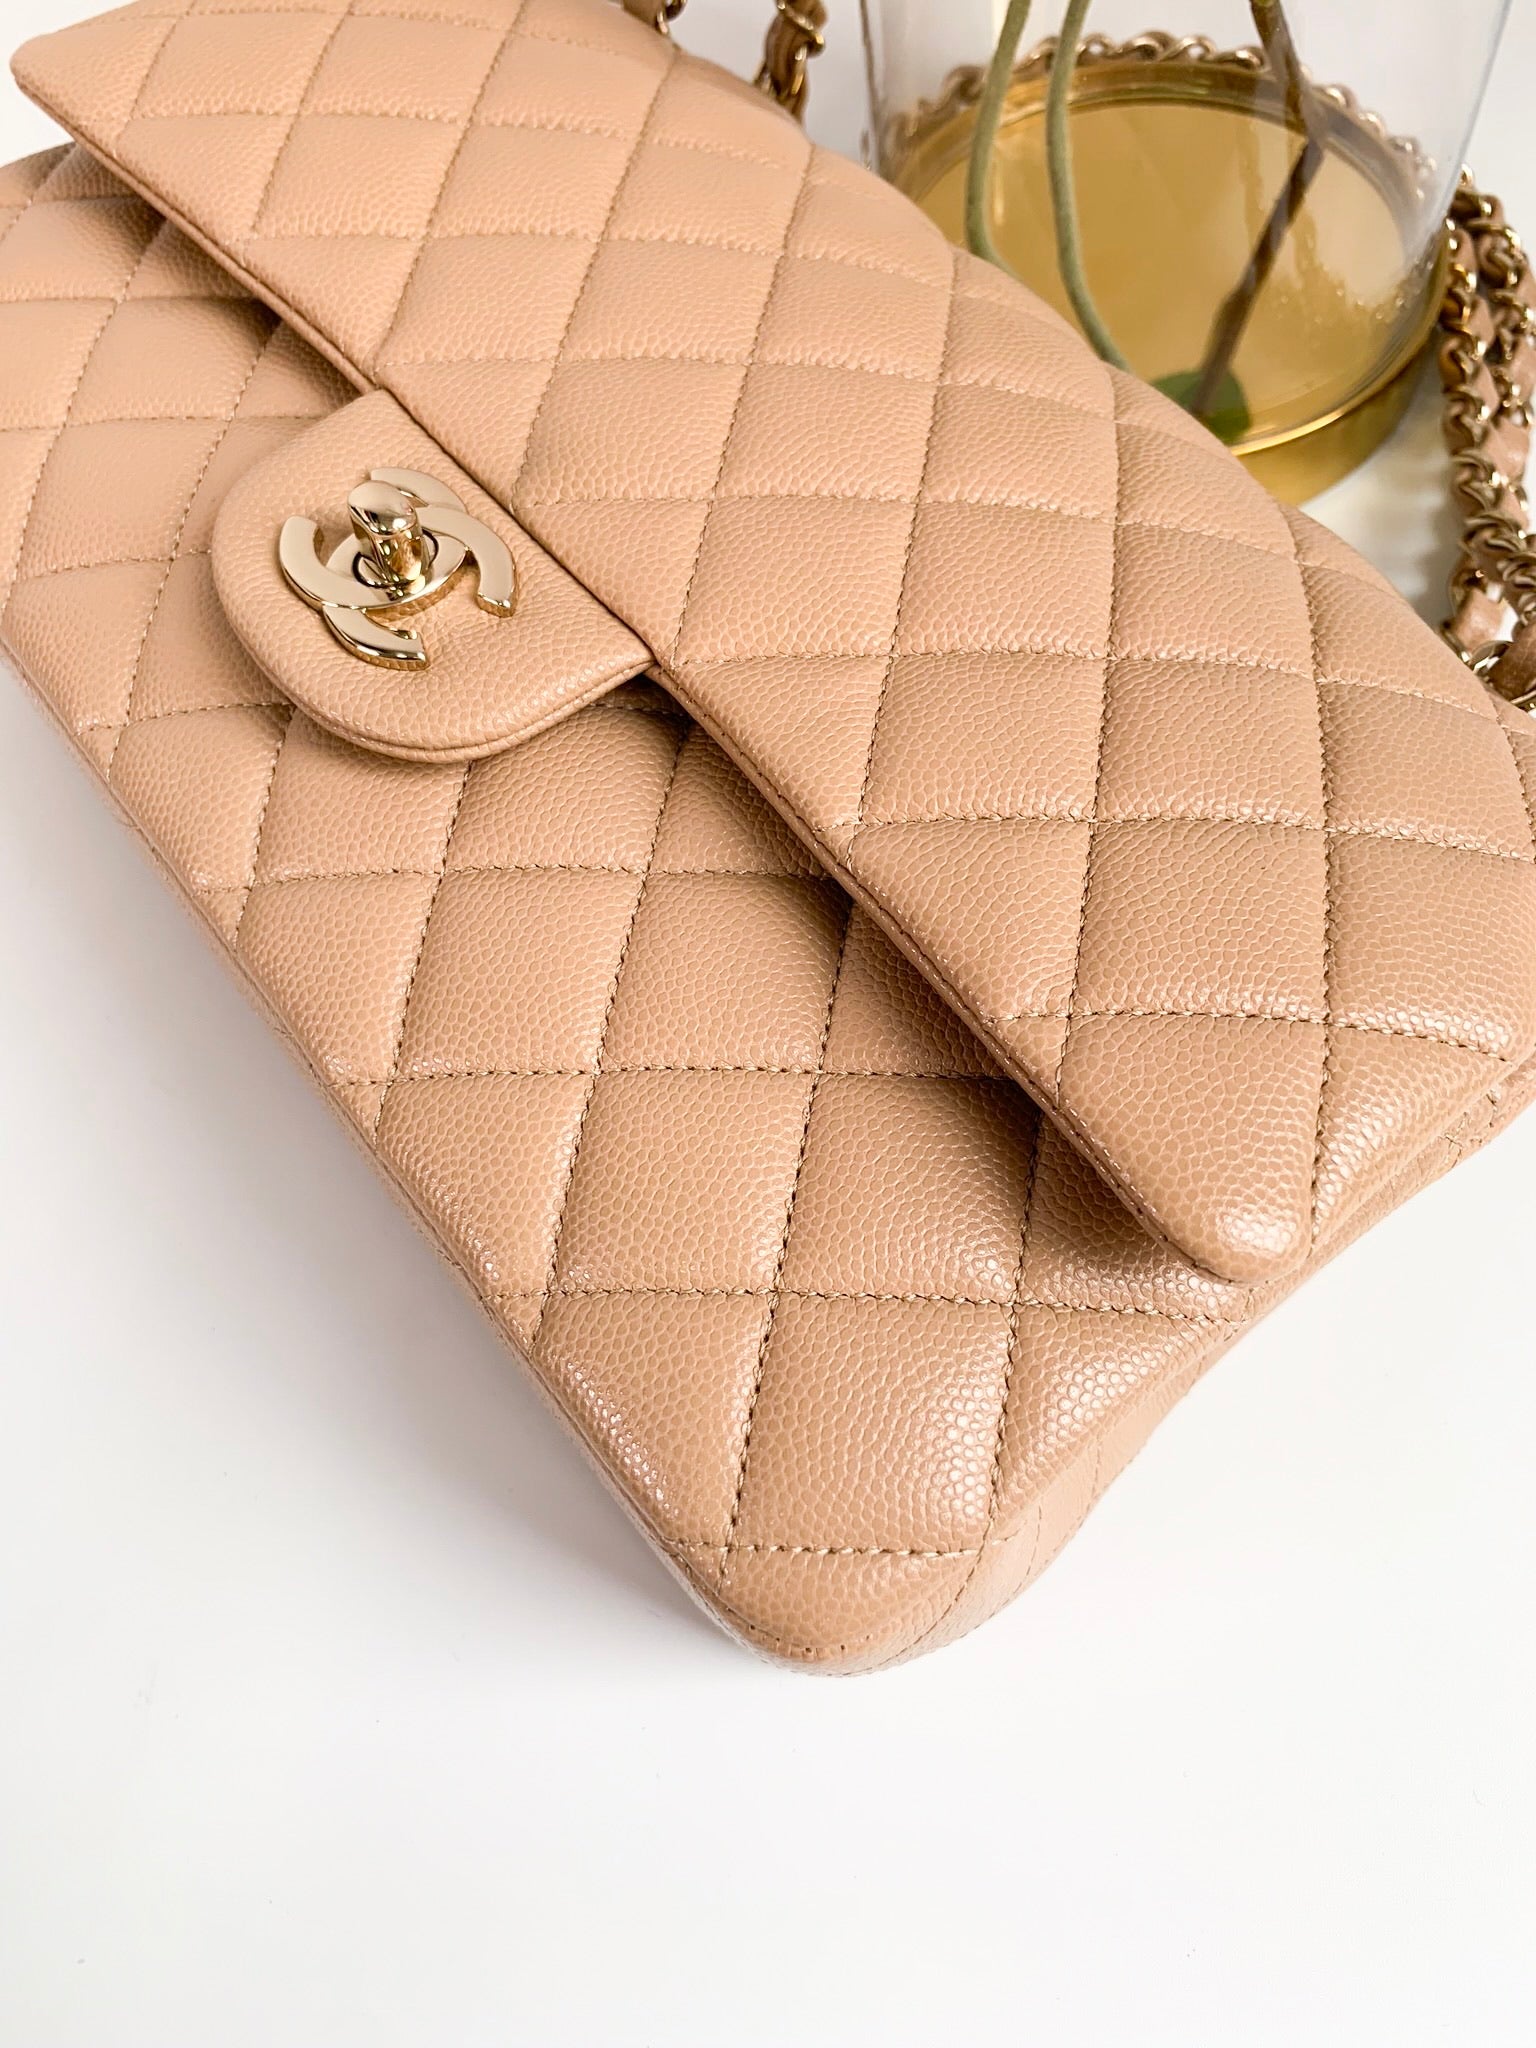 Chanel Caviar Quilted M/L Double Flap Beige Light Gold Hardware